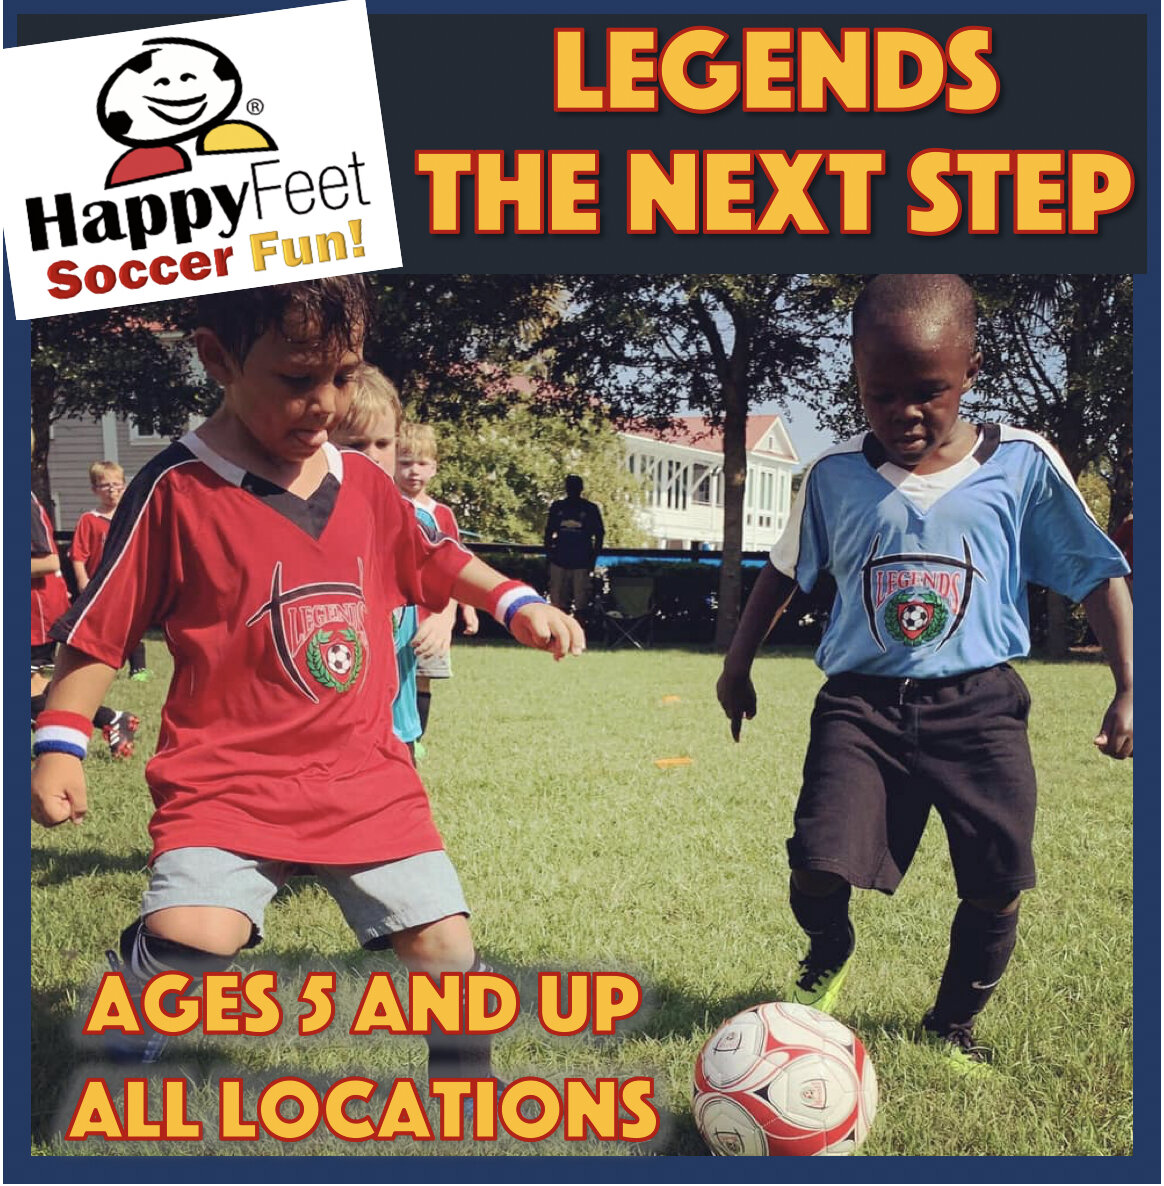 Legends The Next Step- Ages 5 and Up